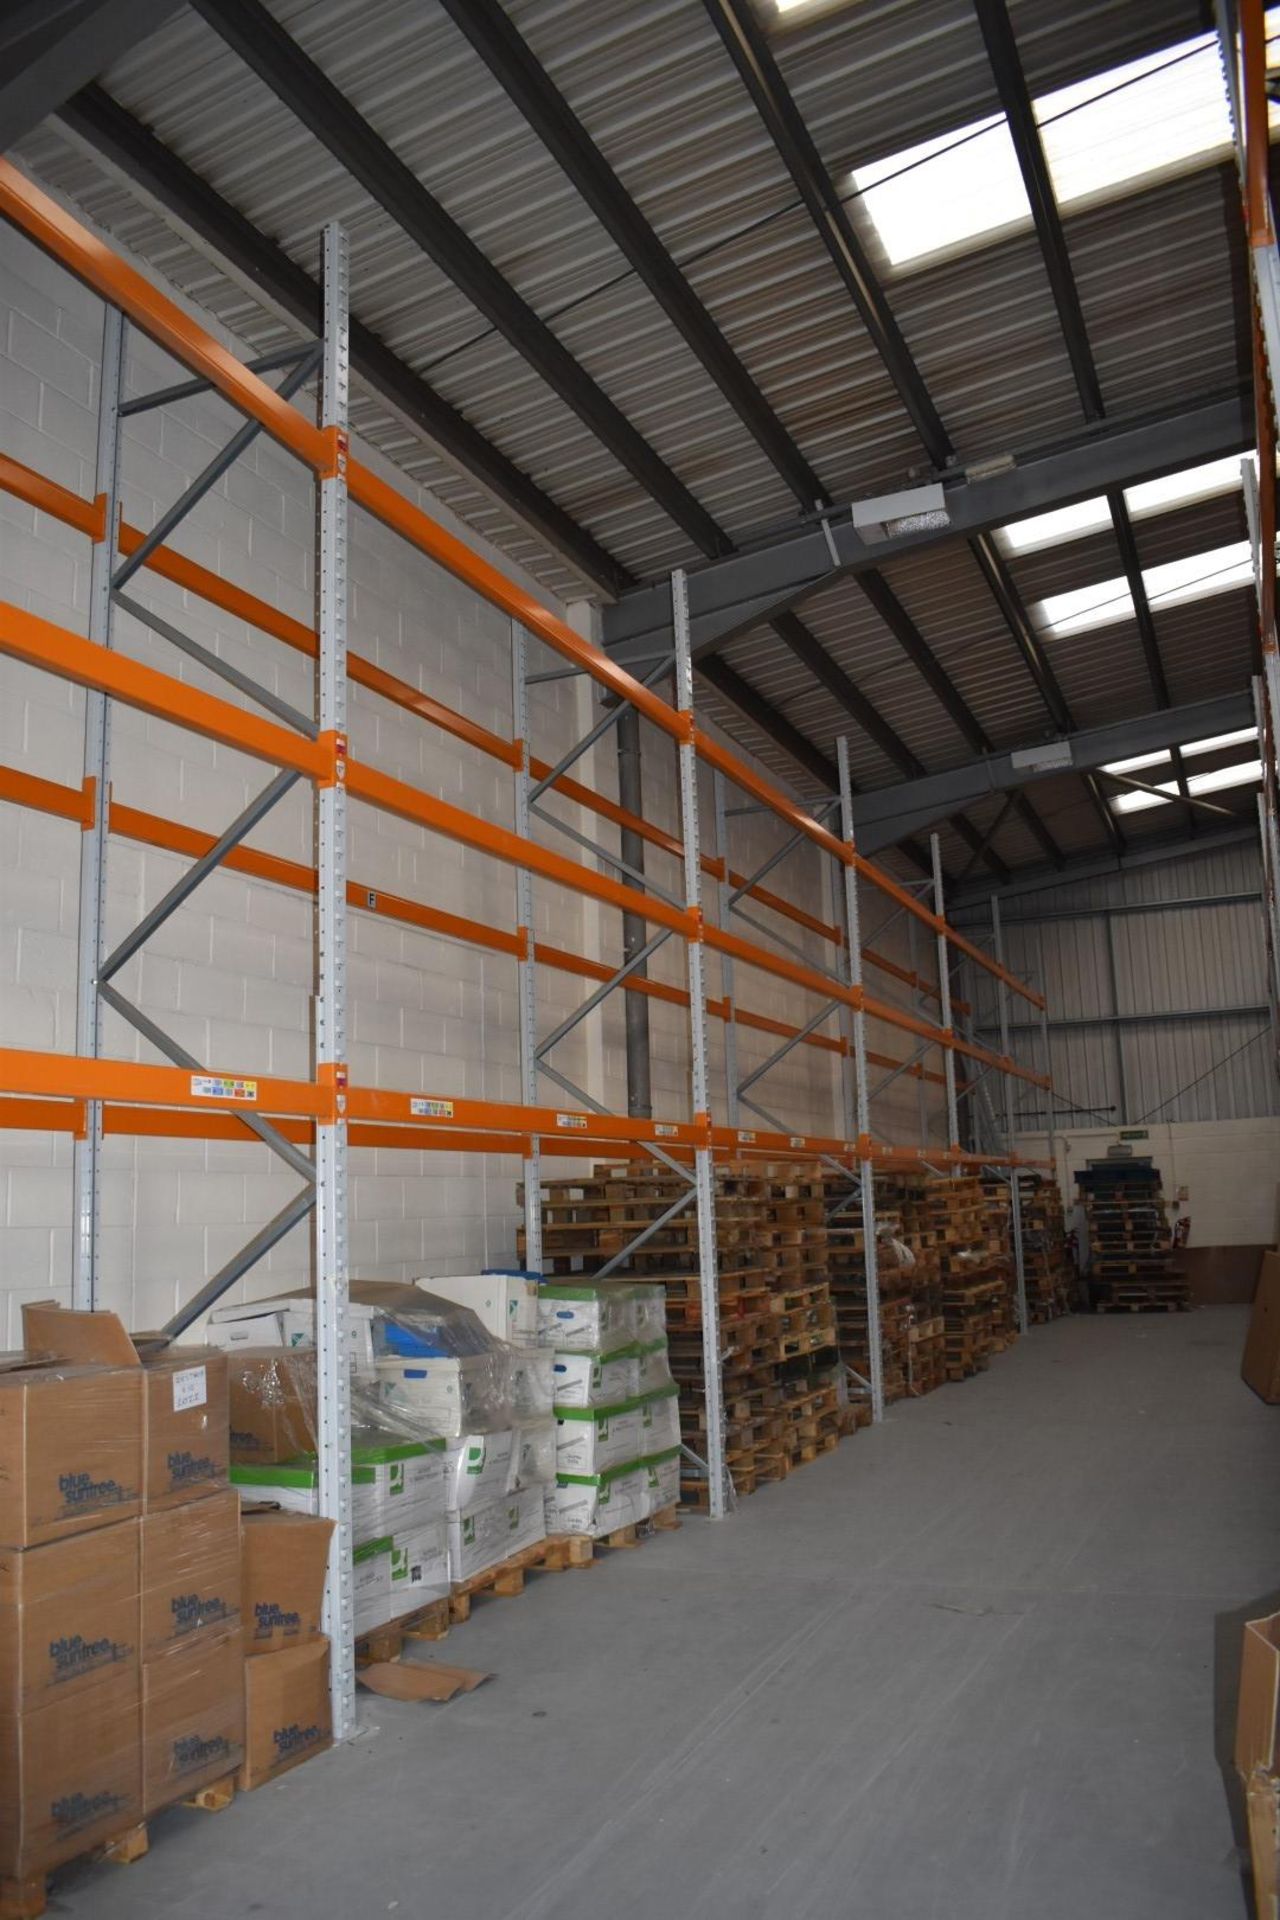 9 x Bays of Apex Pallet Racking - Includes 10 x Apex 16 UK 16,000kg Capacity Uprights and 60 x - Image 18 of 19